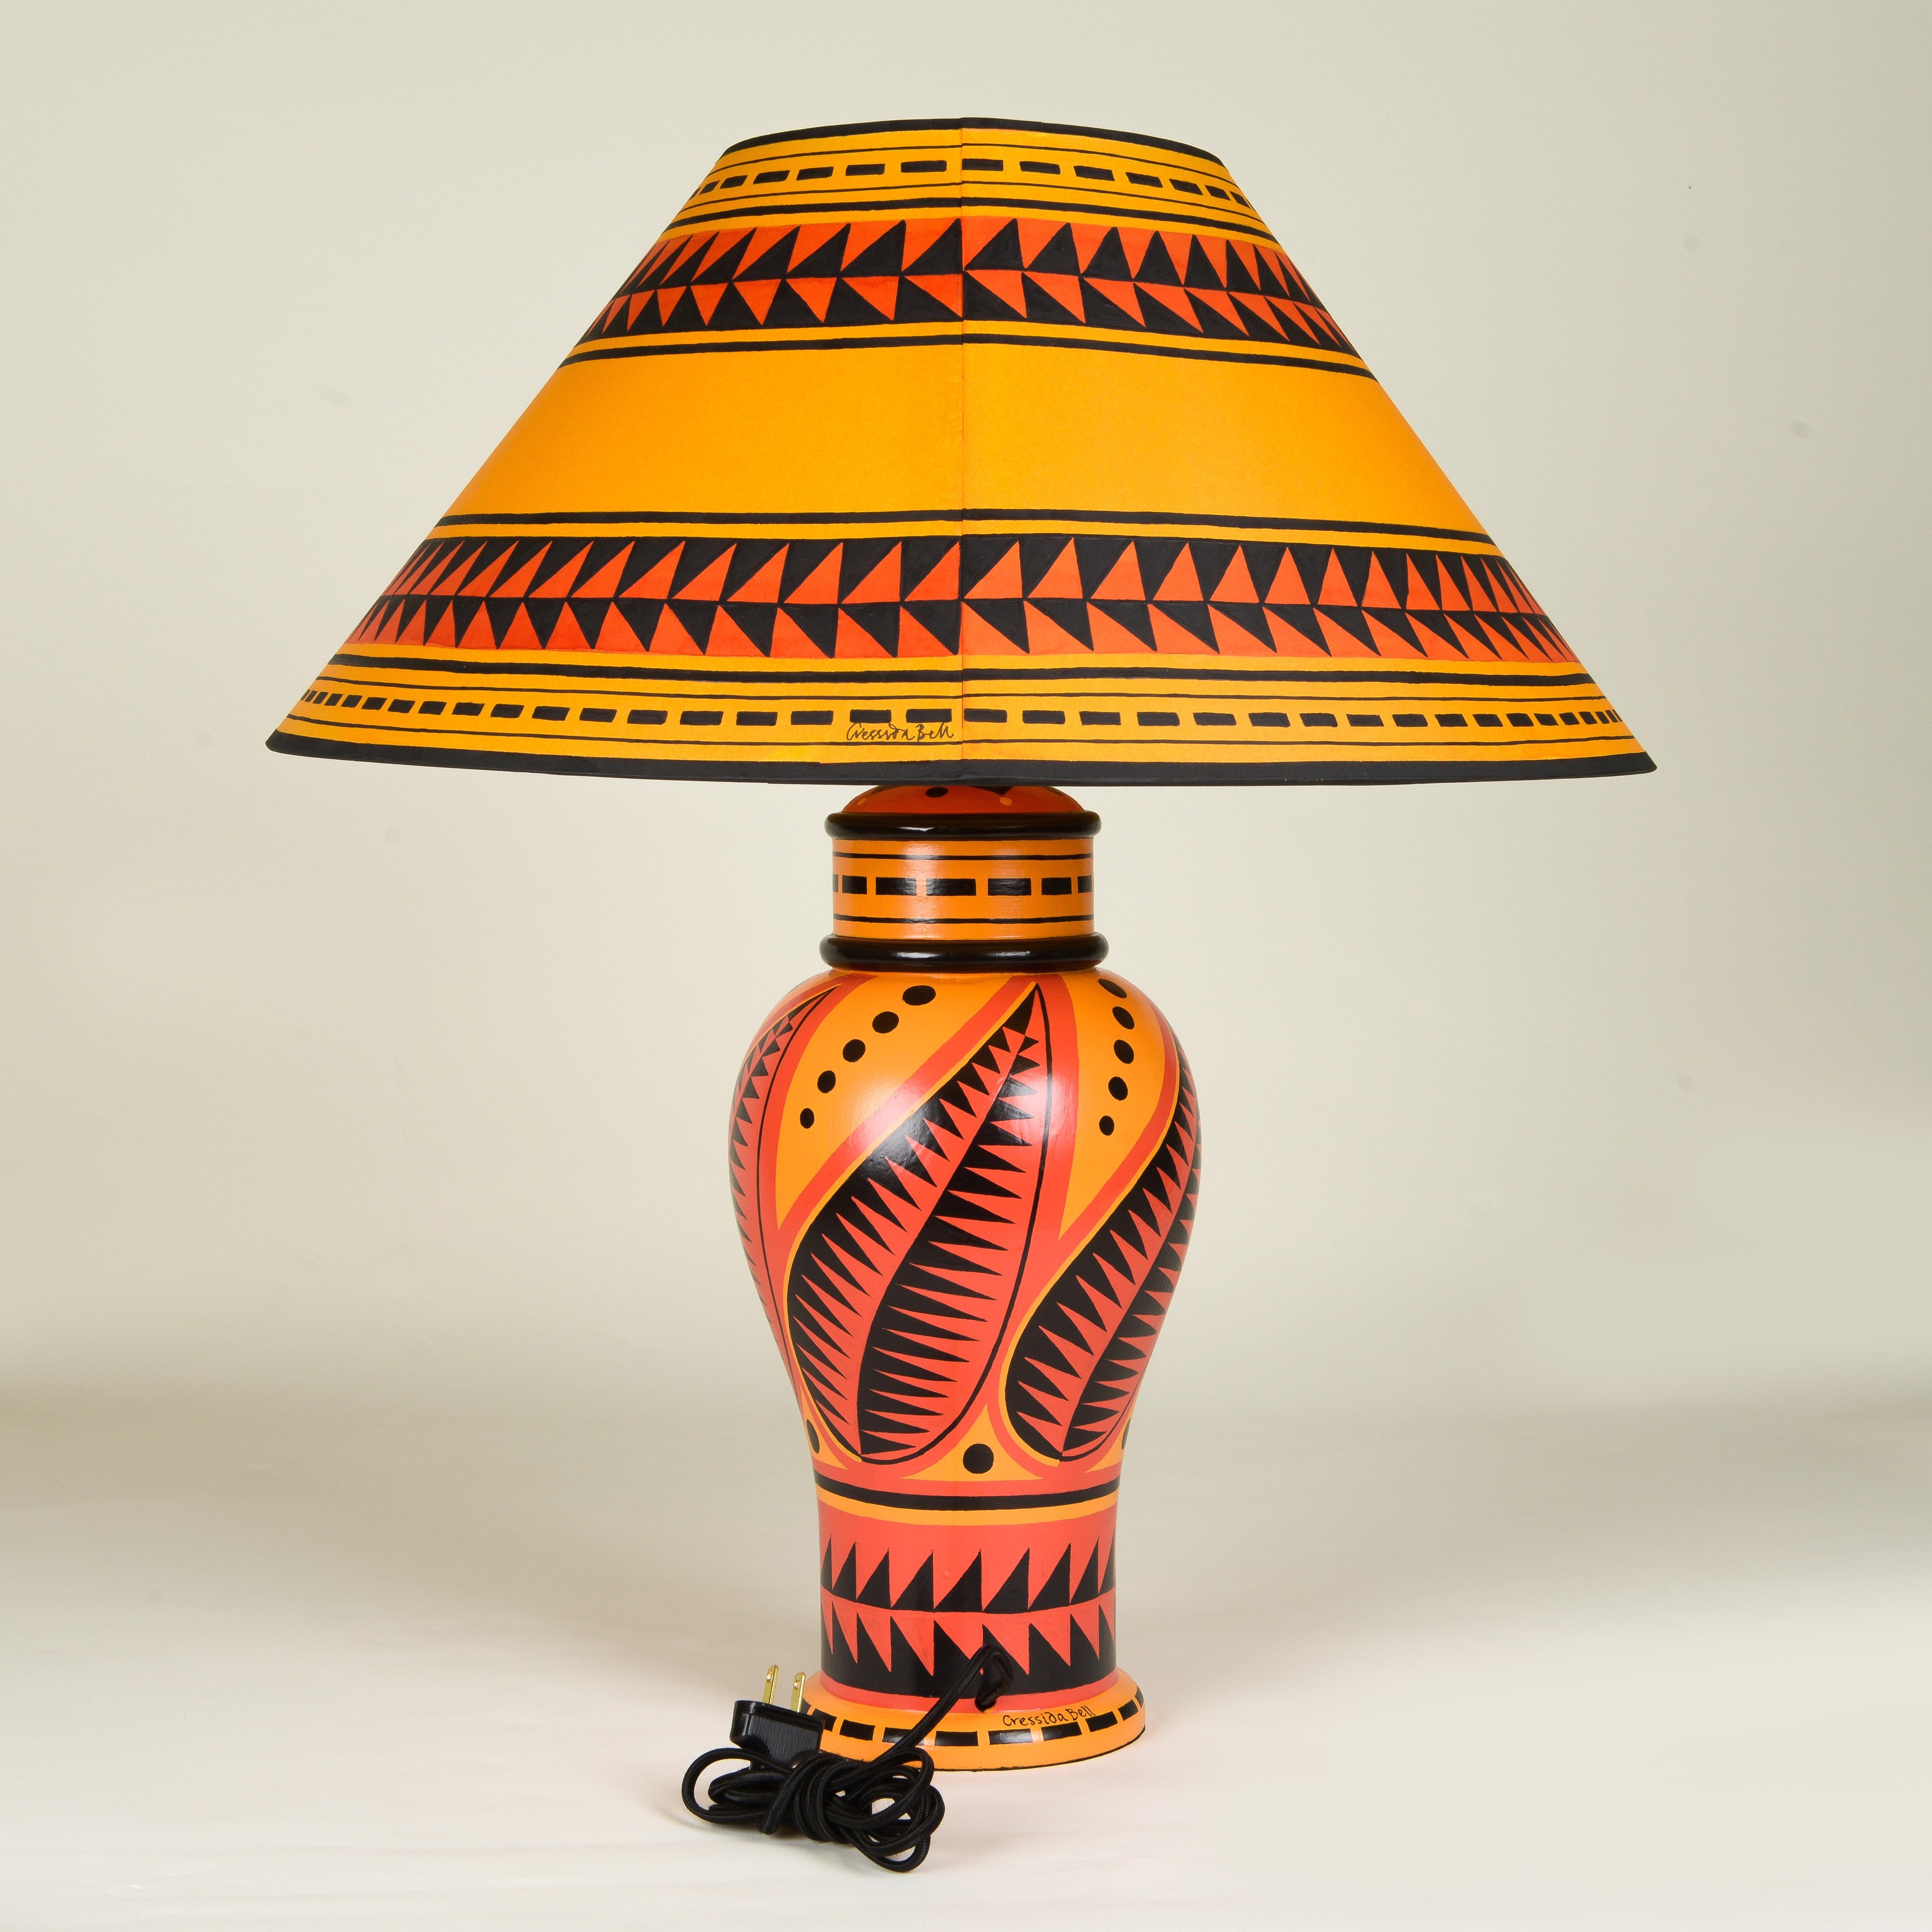 Hand-painted wooden base table lamp with matching shade adorned with red, and black.

Cressida Bell is a British designer specialising in textiles and interiors. From her London studio, she produces a wide range of products including accessories for